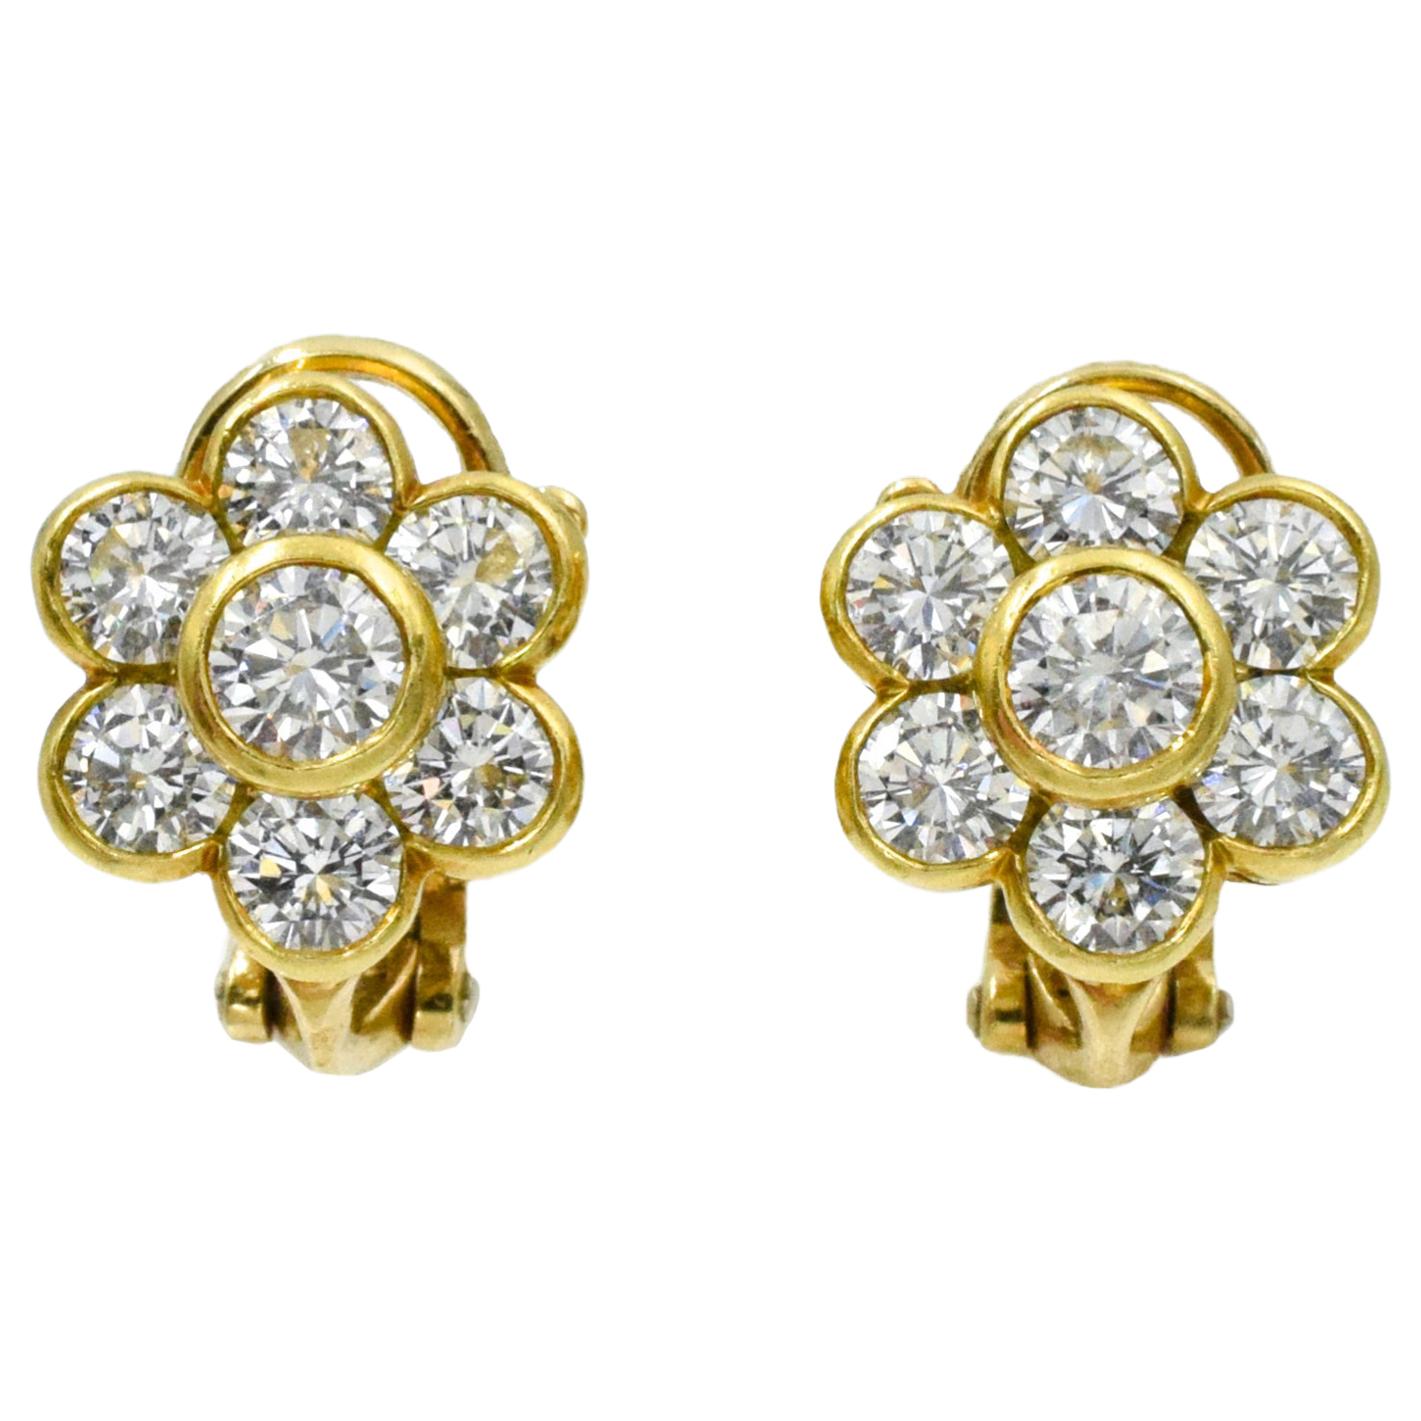 Van Cleef and Arpels Diamond Flower Earrings. This pair of earrings has 14 roound diamonds with a total carat weight of approximately 2.6 carats all bezel set in 18k yellow gold with omega back.
 Signed Van Cleef & Arpels Serial No. NY xxxxx,
